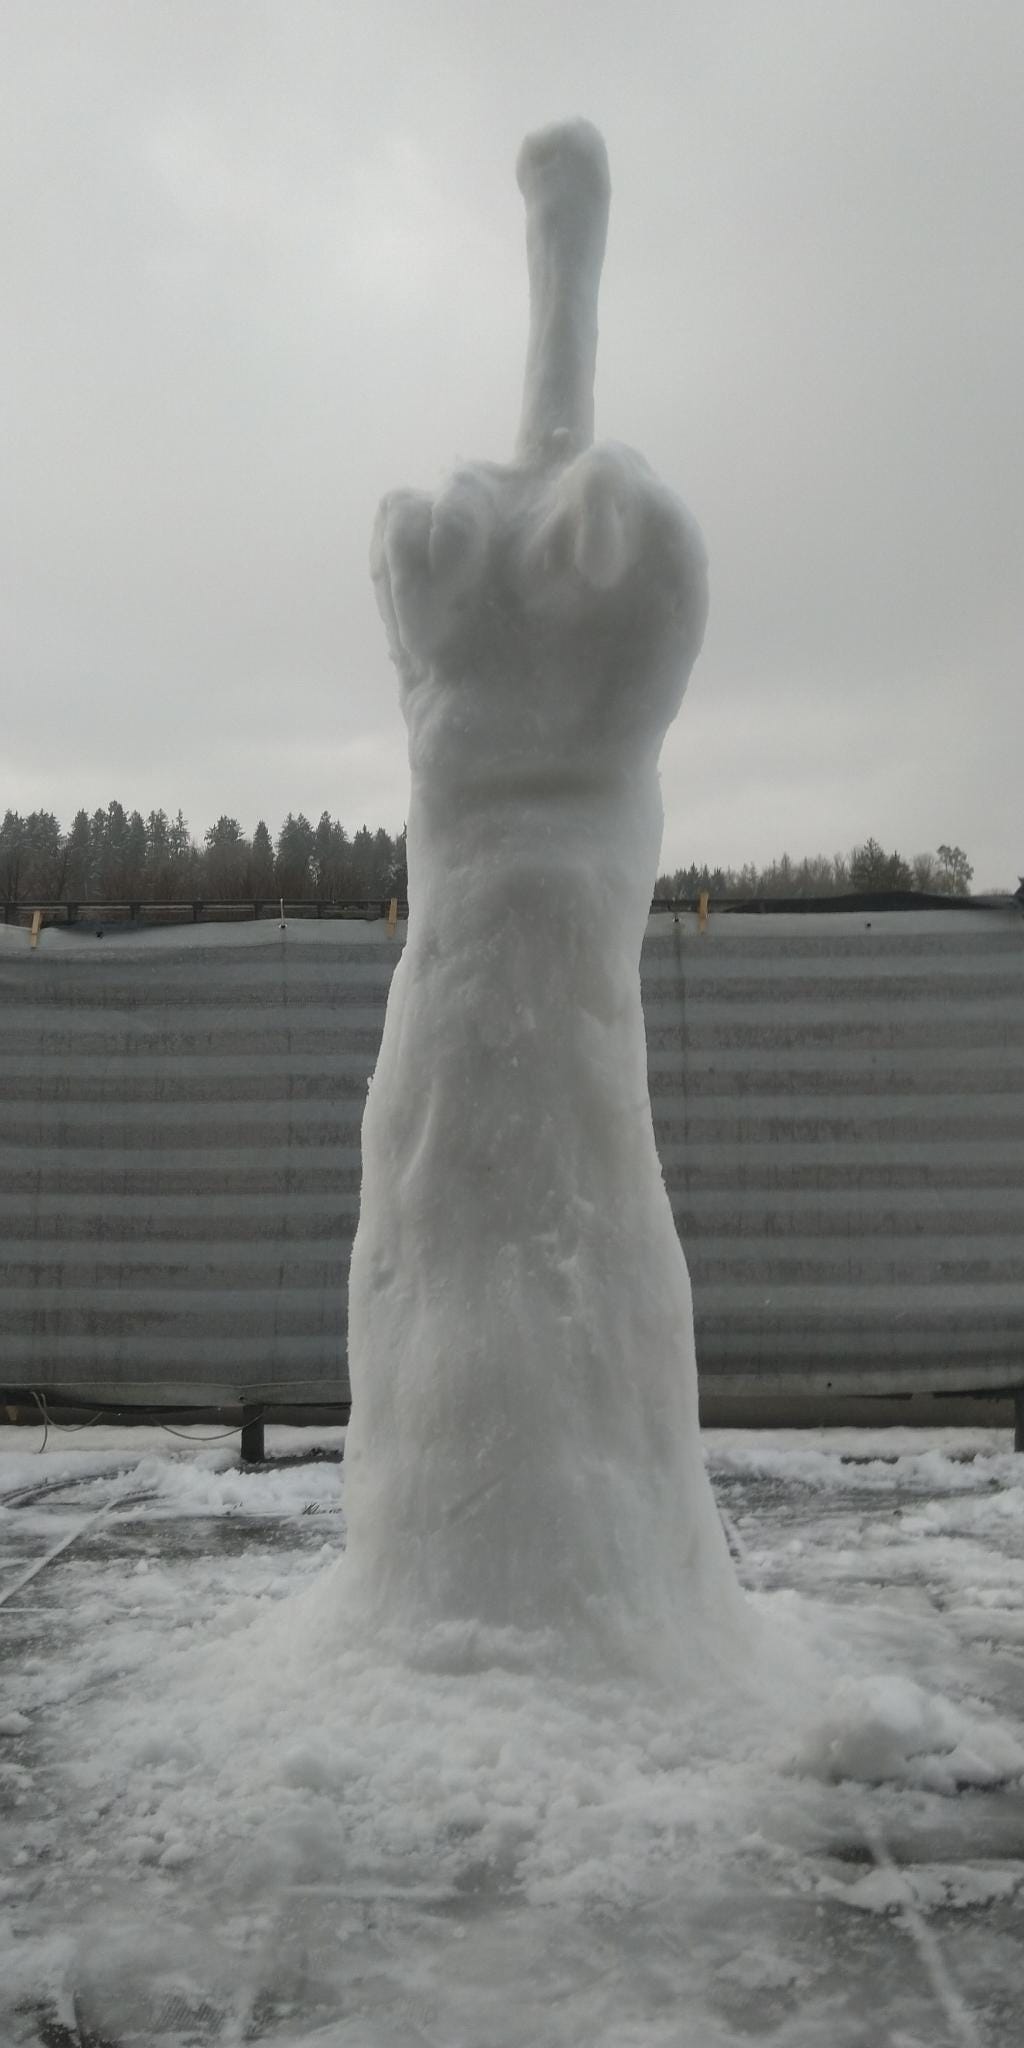 Snow sculpture of a hand showing the middle finger